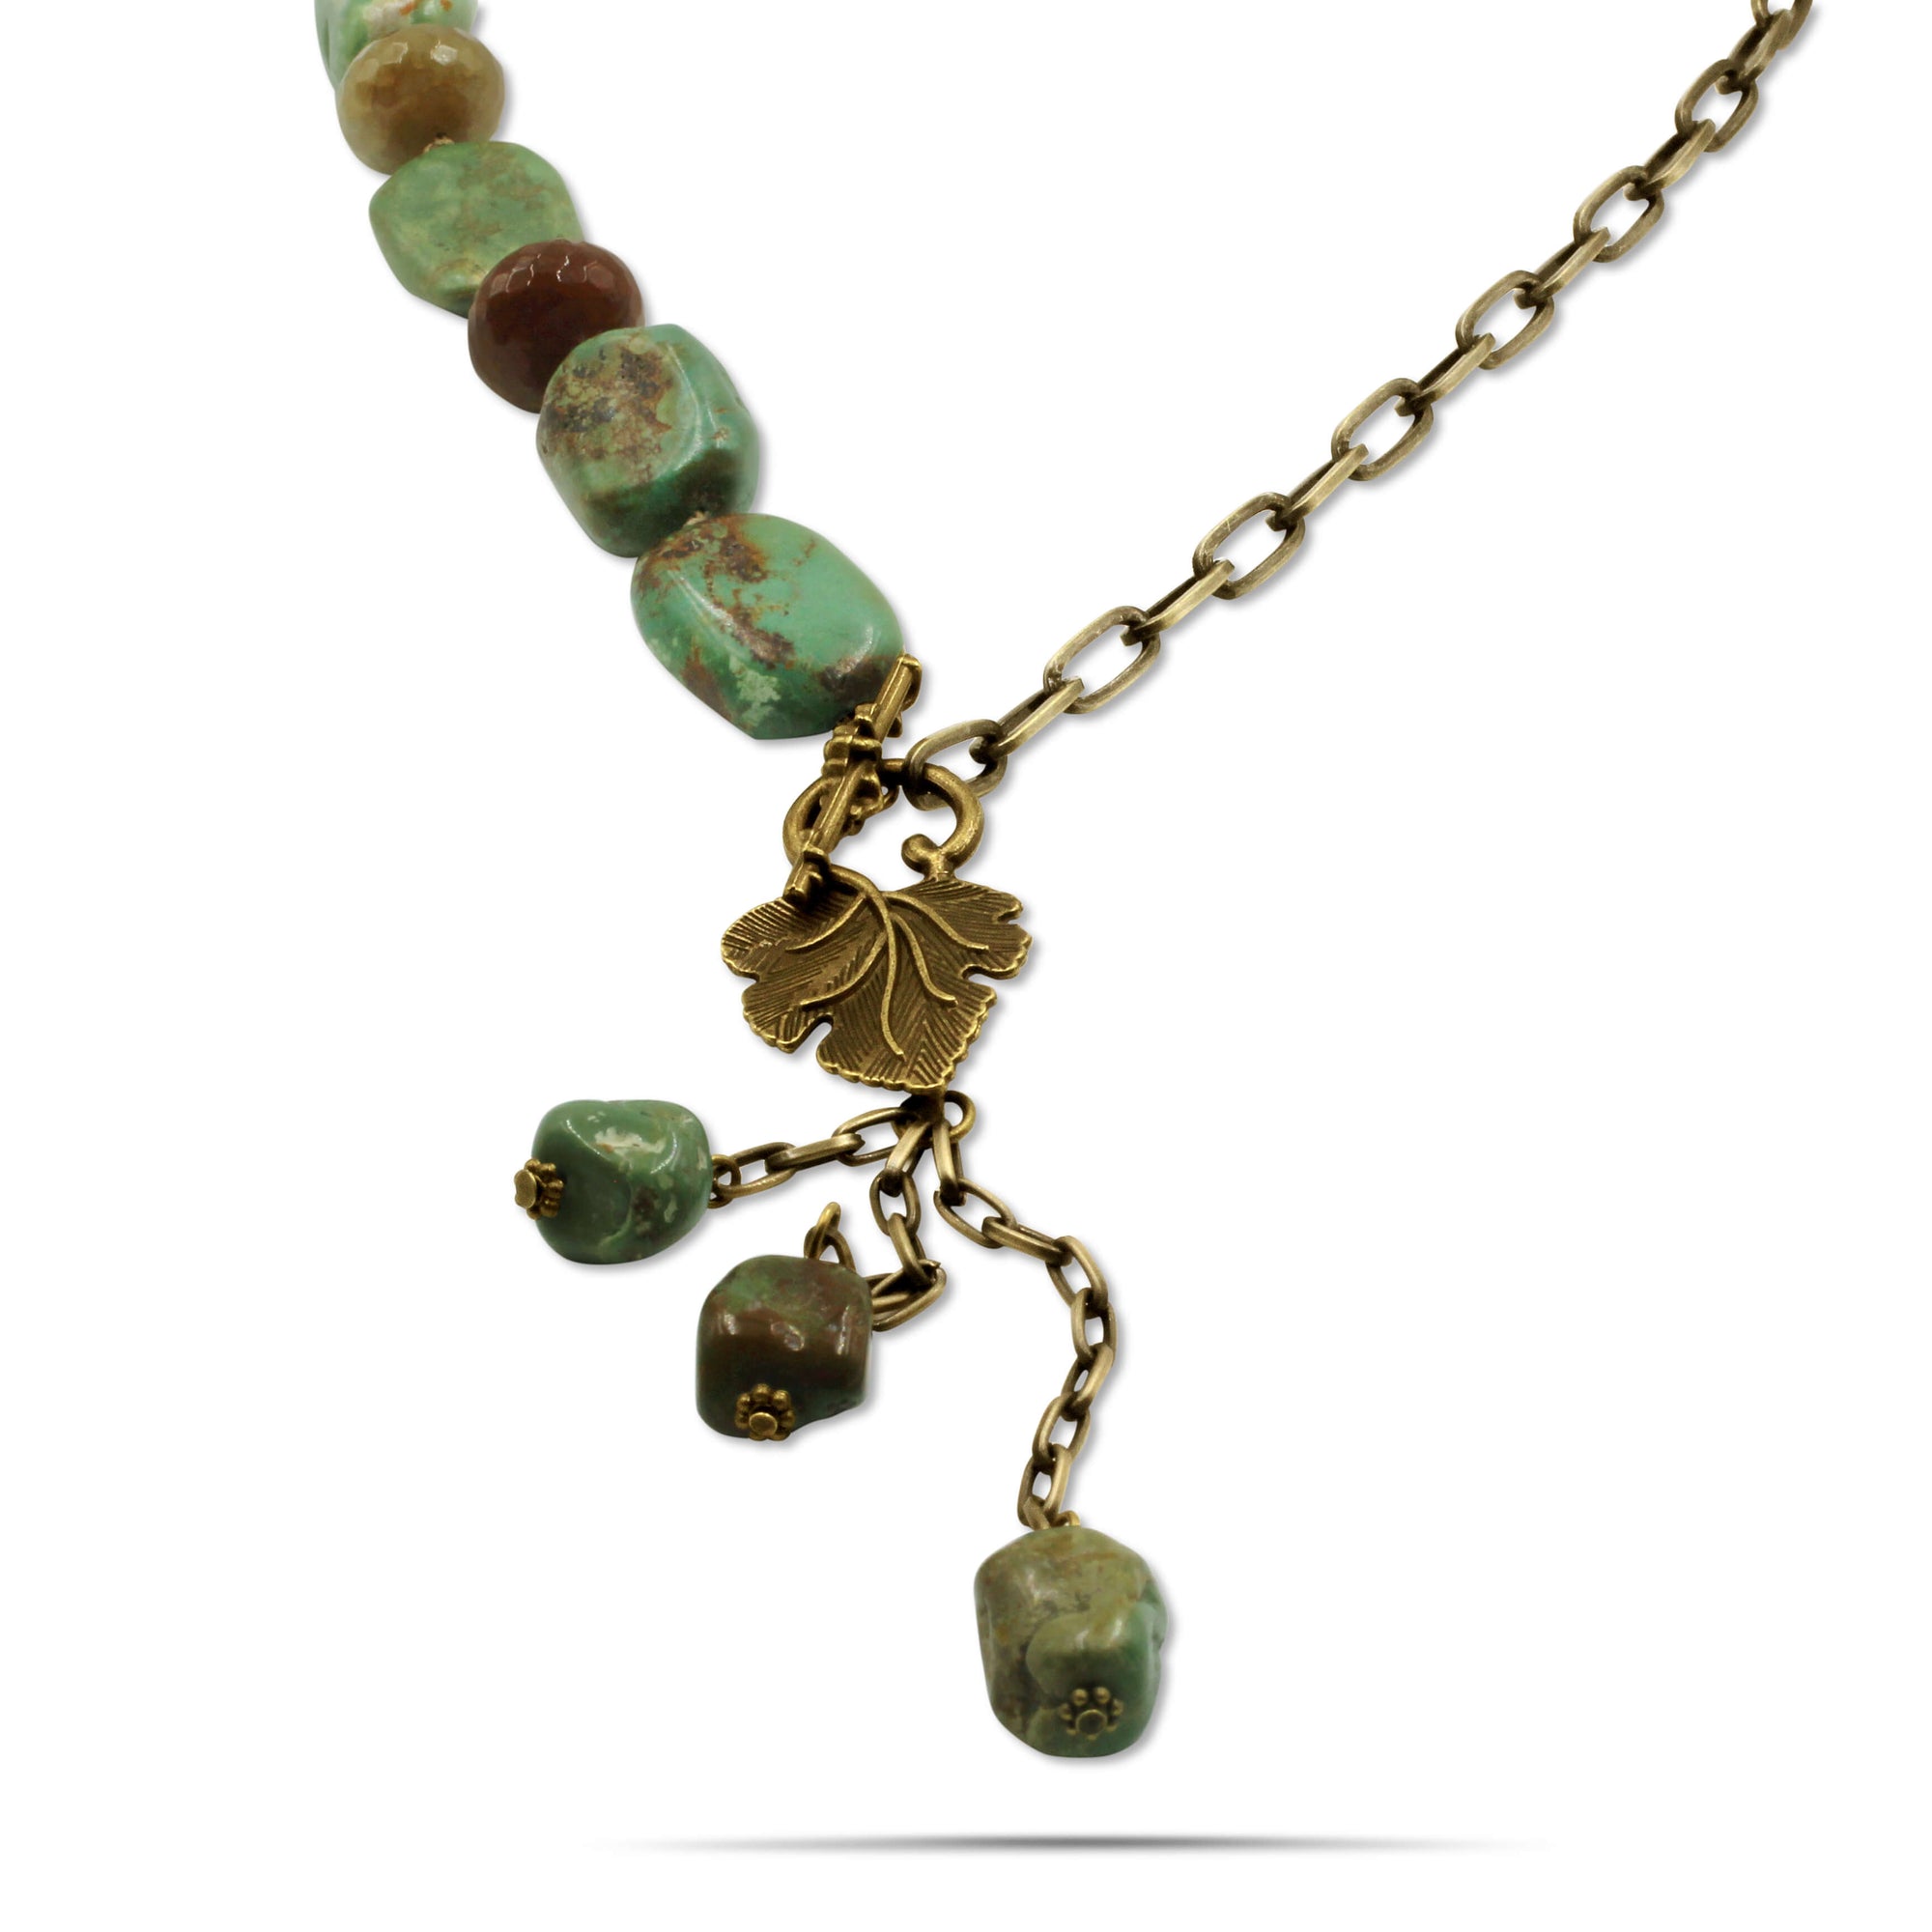 Maggie Hand-knotted Turquoise Jasper Agate Brass Necklace - Creative Jewelry by Marcia - Asymmetrical Jewelry - Timeless Jewelry